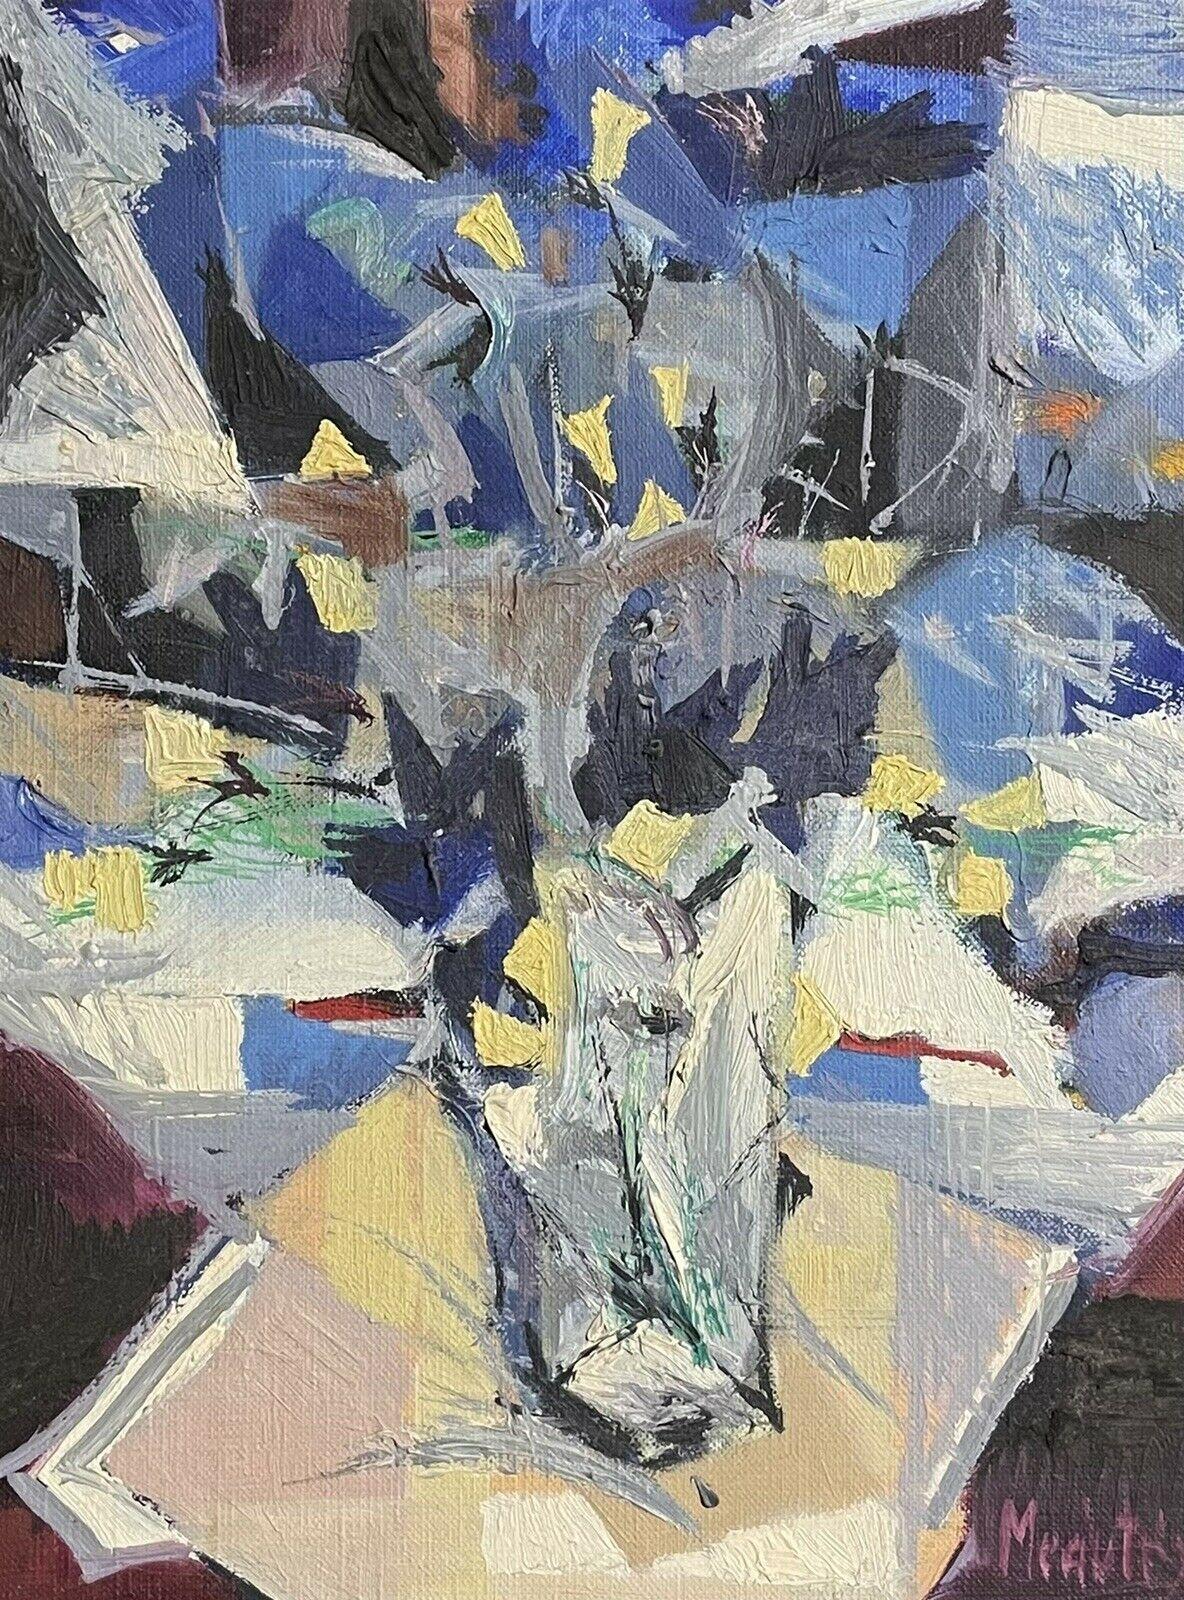 French cubist Still-Life Painting - 1970's French Cubist Abstract Oil Painting Signed, Blue & White Flowers in Vase